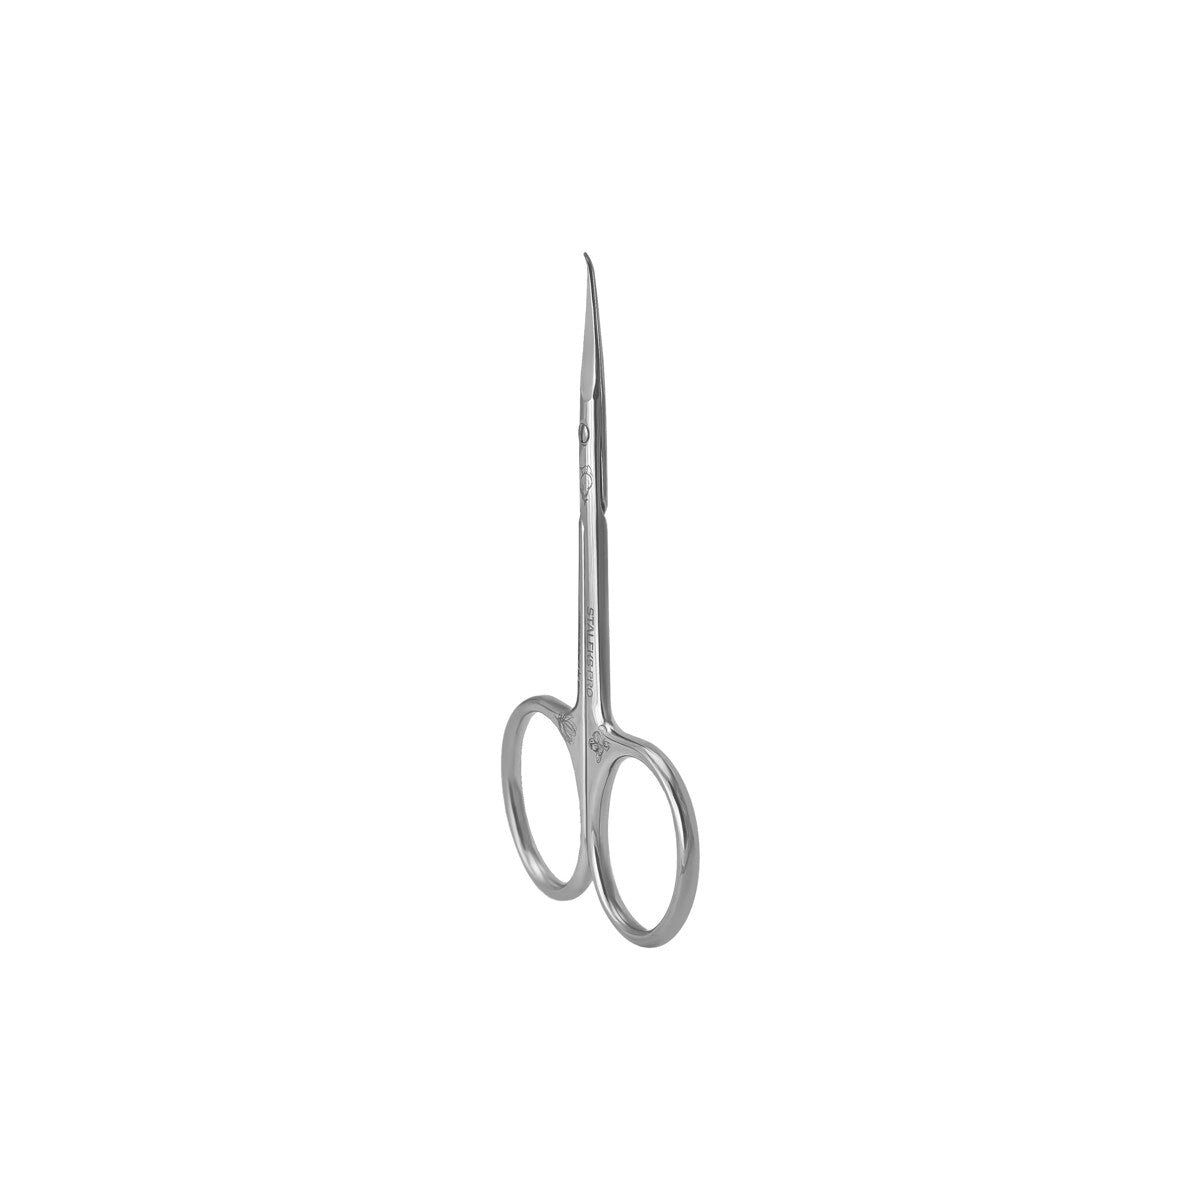 Staleks_Professional_cuticle_scissors_Exc.23_TYPE_2_Magnol_SX-23_2M_5 product view angle